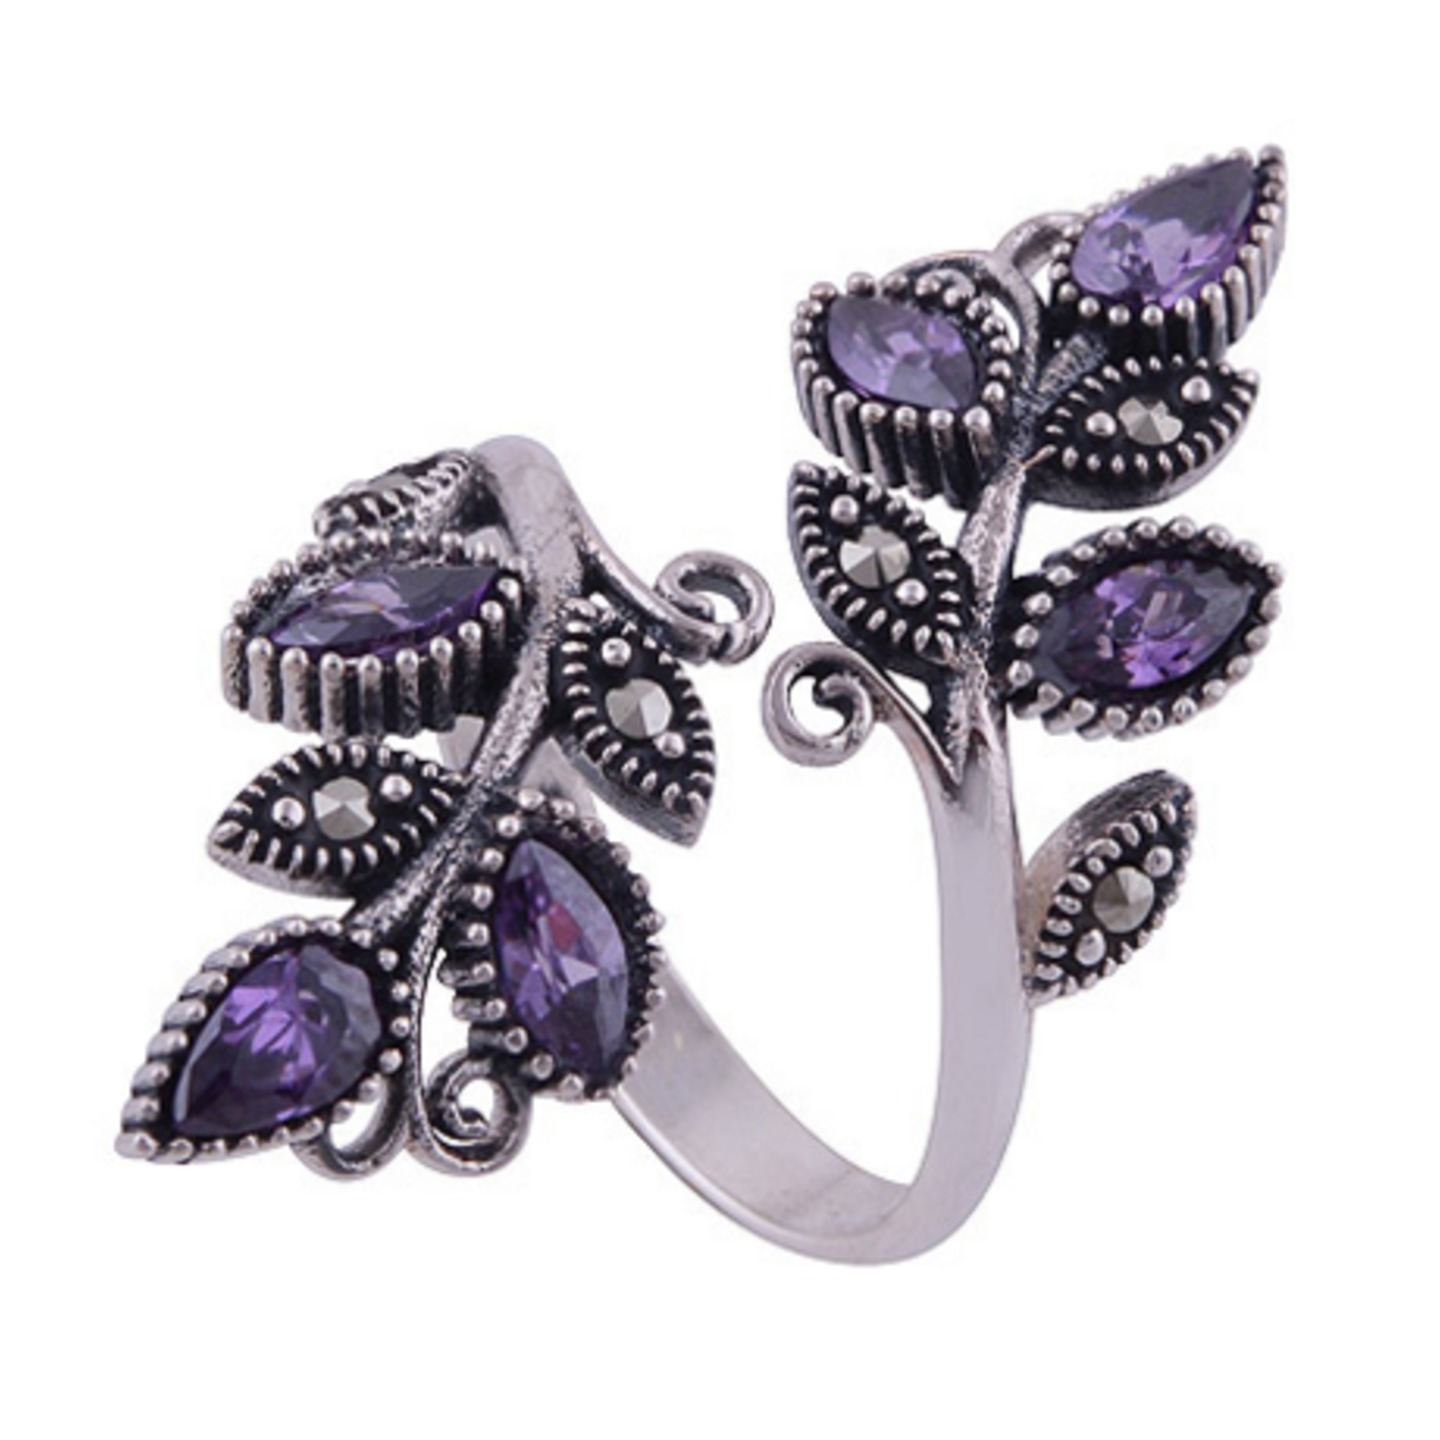 The Lilac Vine Silver Ring